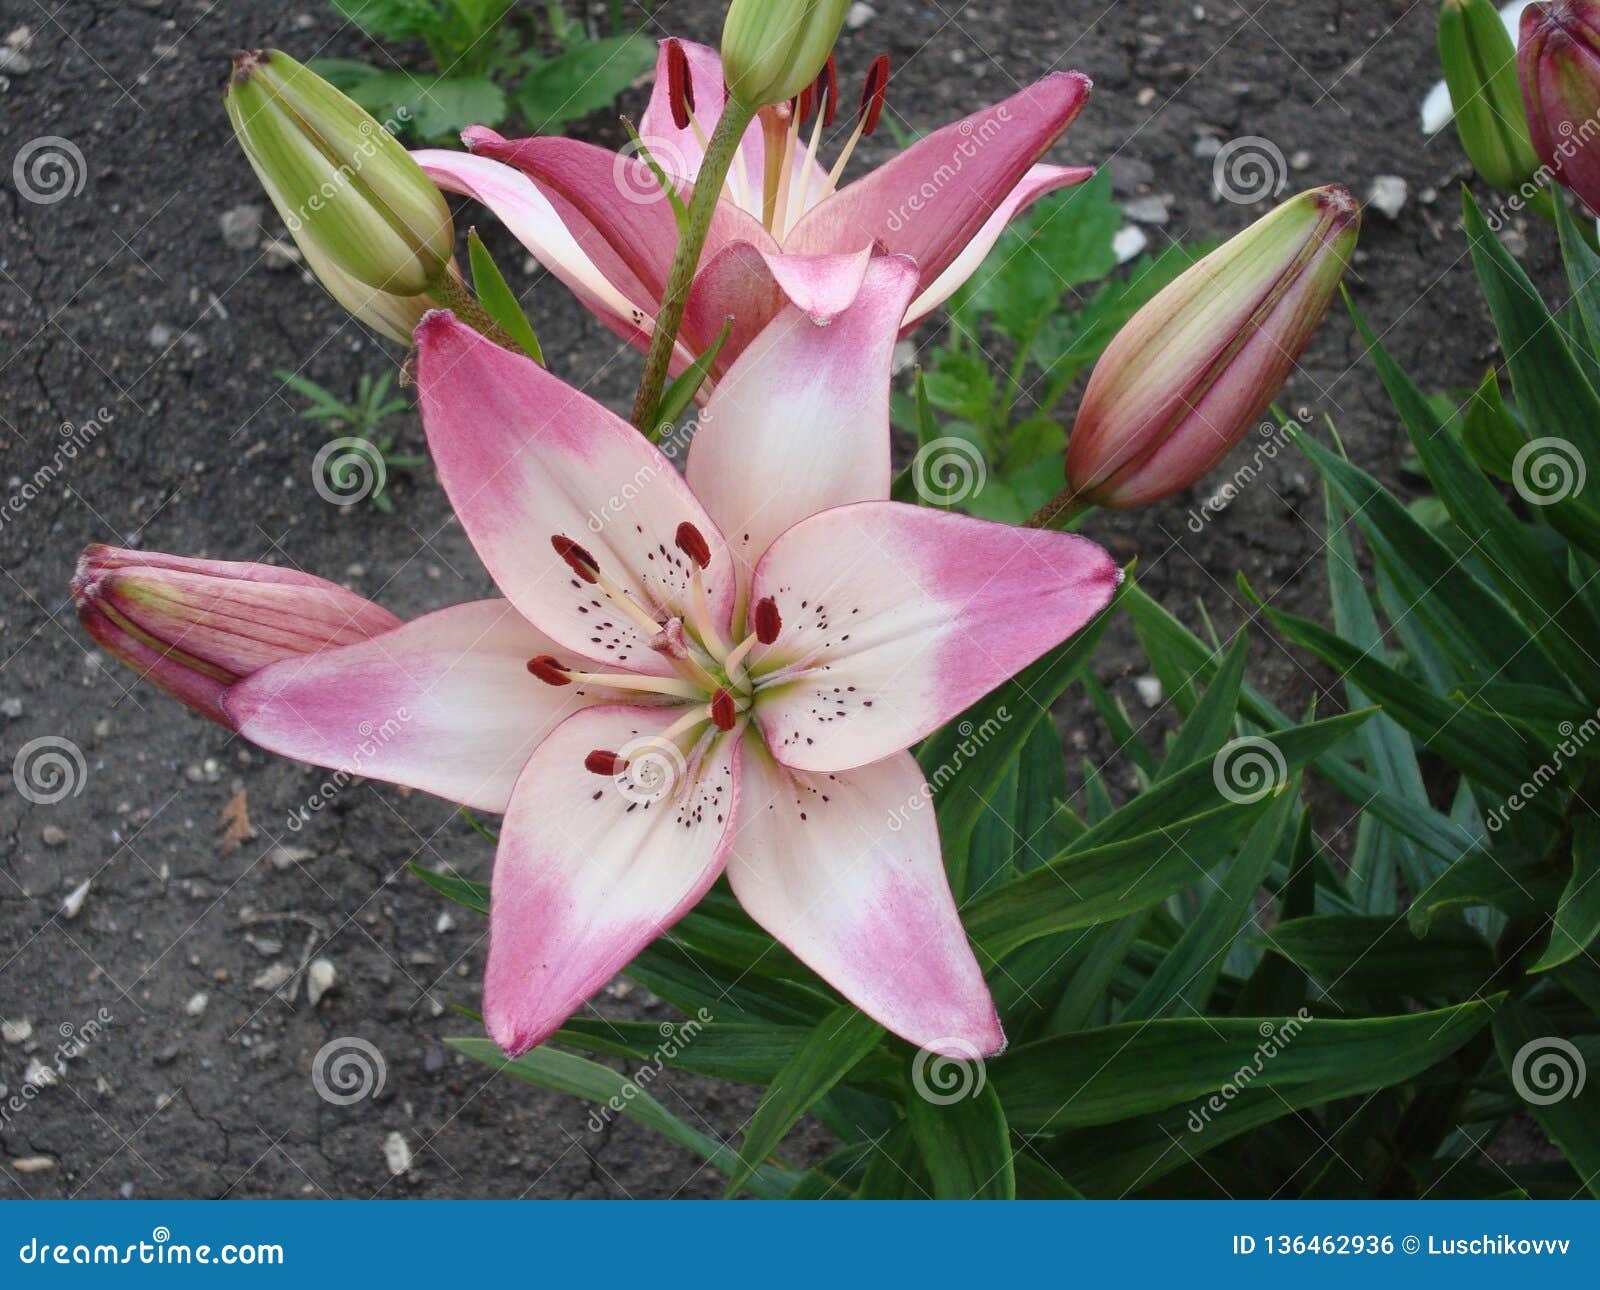 lily (lat. lílium) is a genus of plants of the lily family